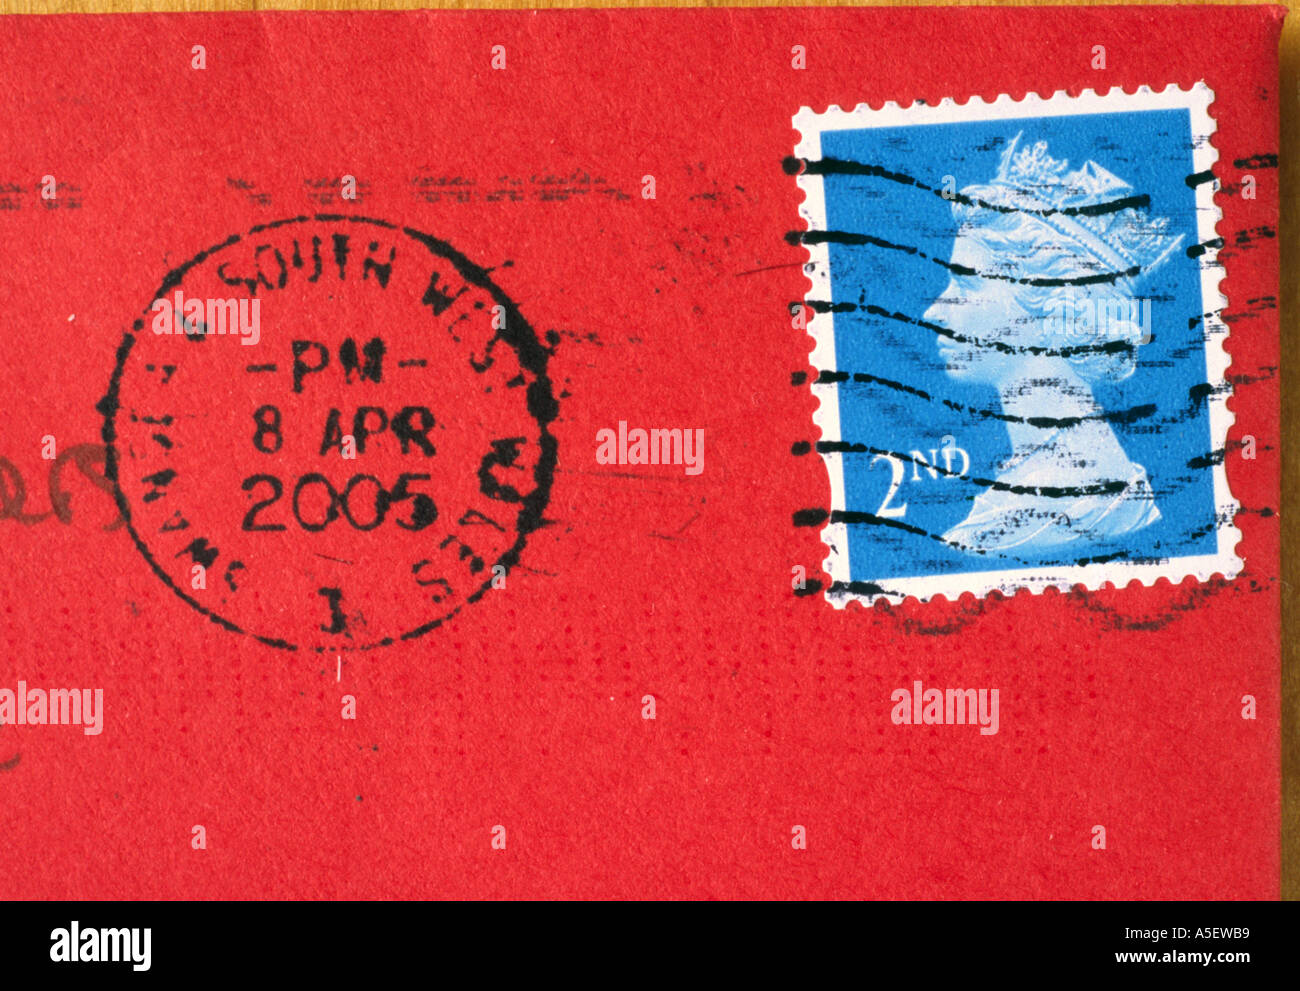 Stamp on red envelope Stock Photo